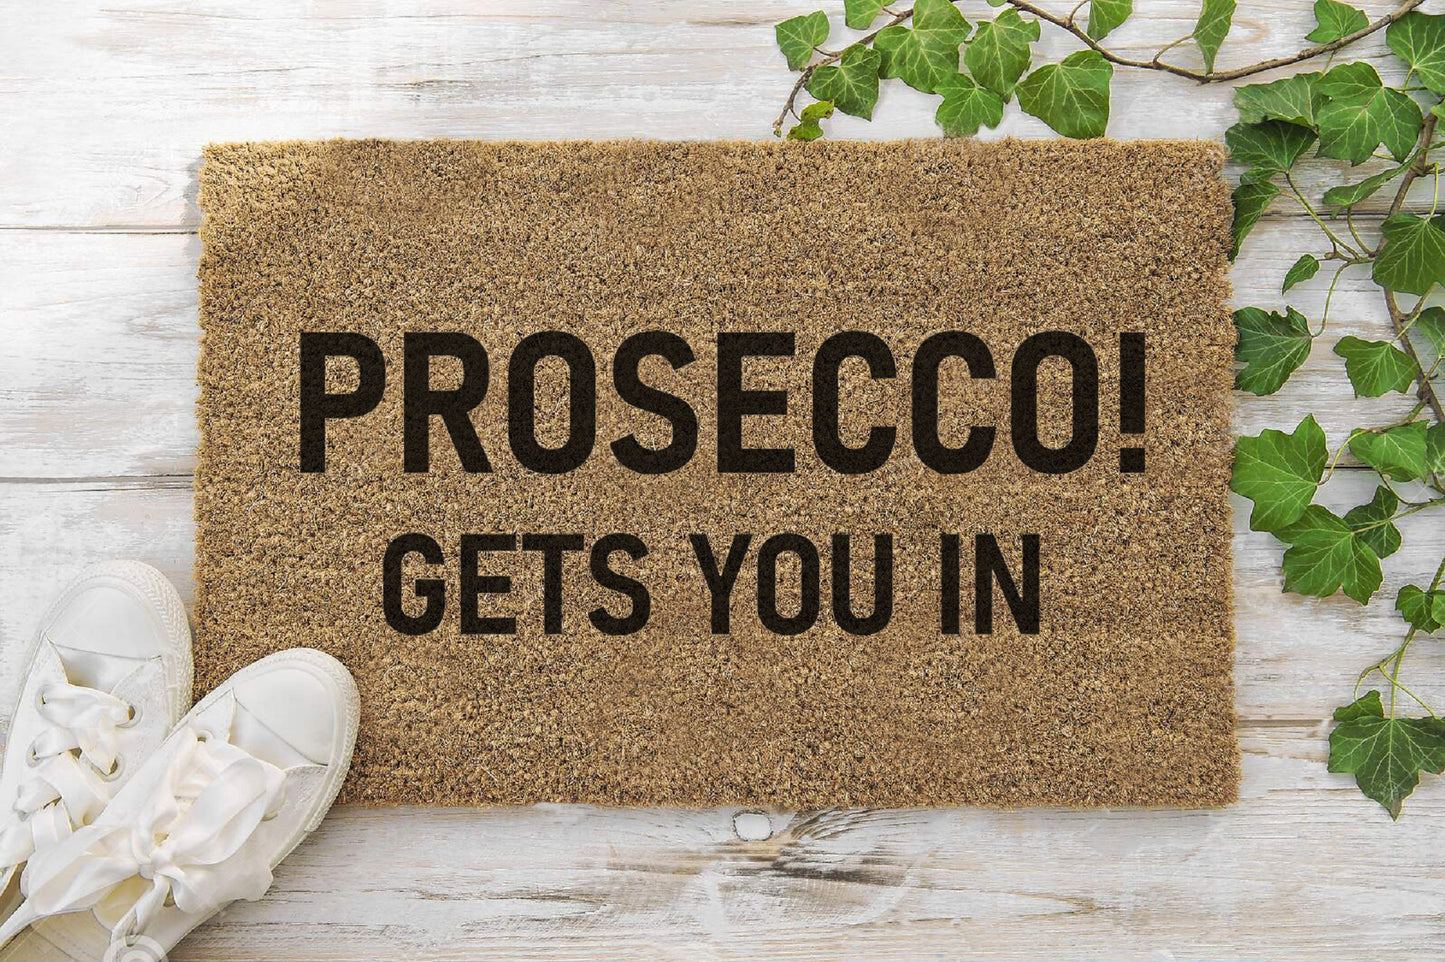 Prosecco! Gets You In